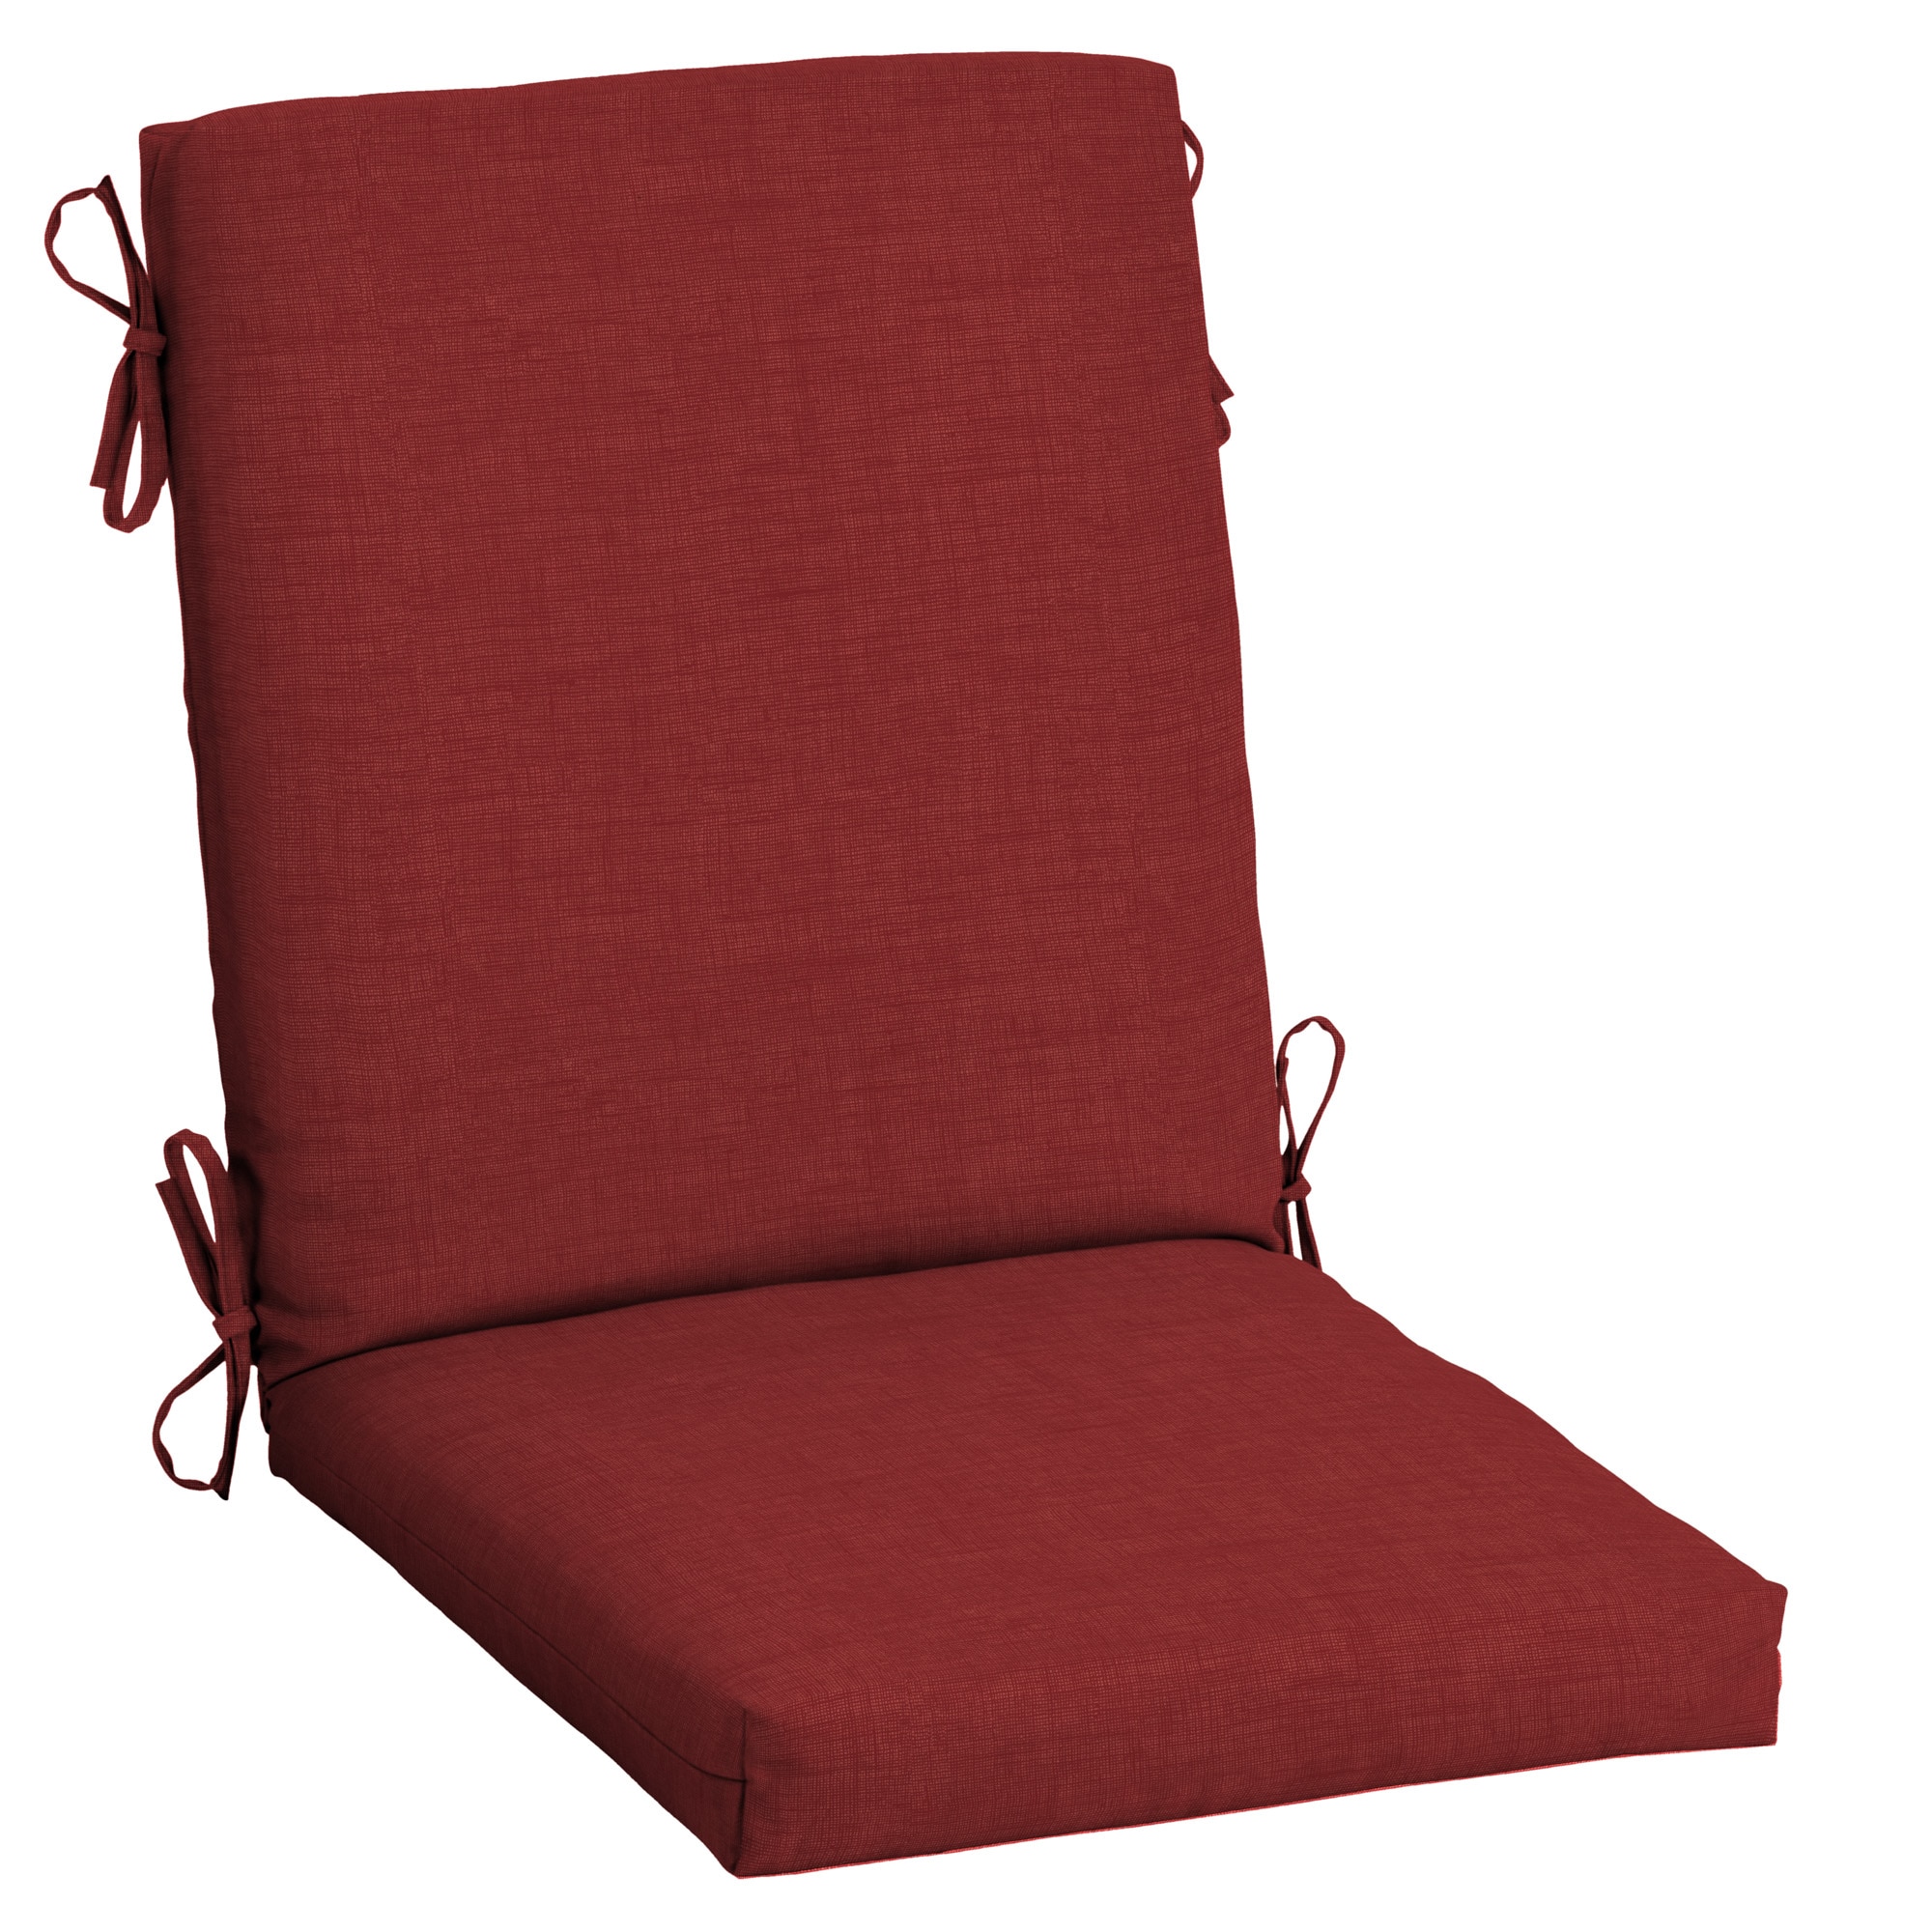 Rocking Chairs Patio Furniture Cushions at Lowes.com